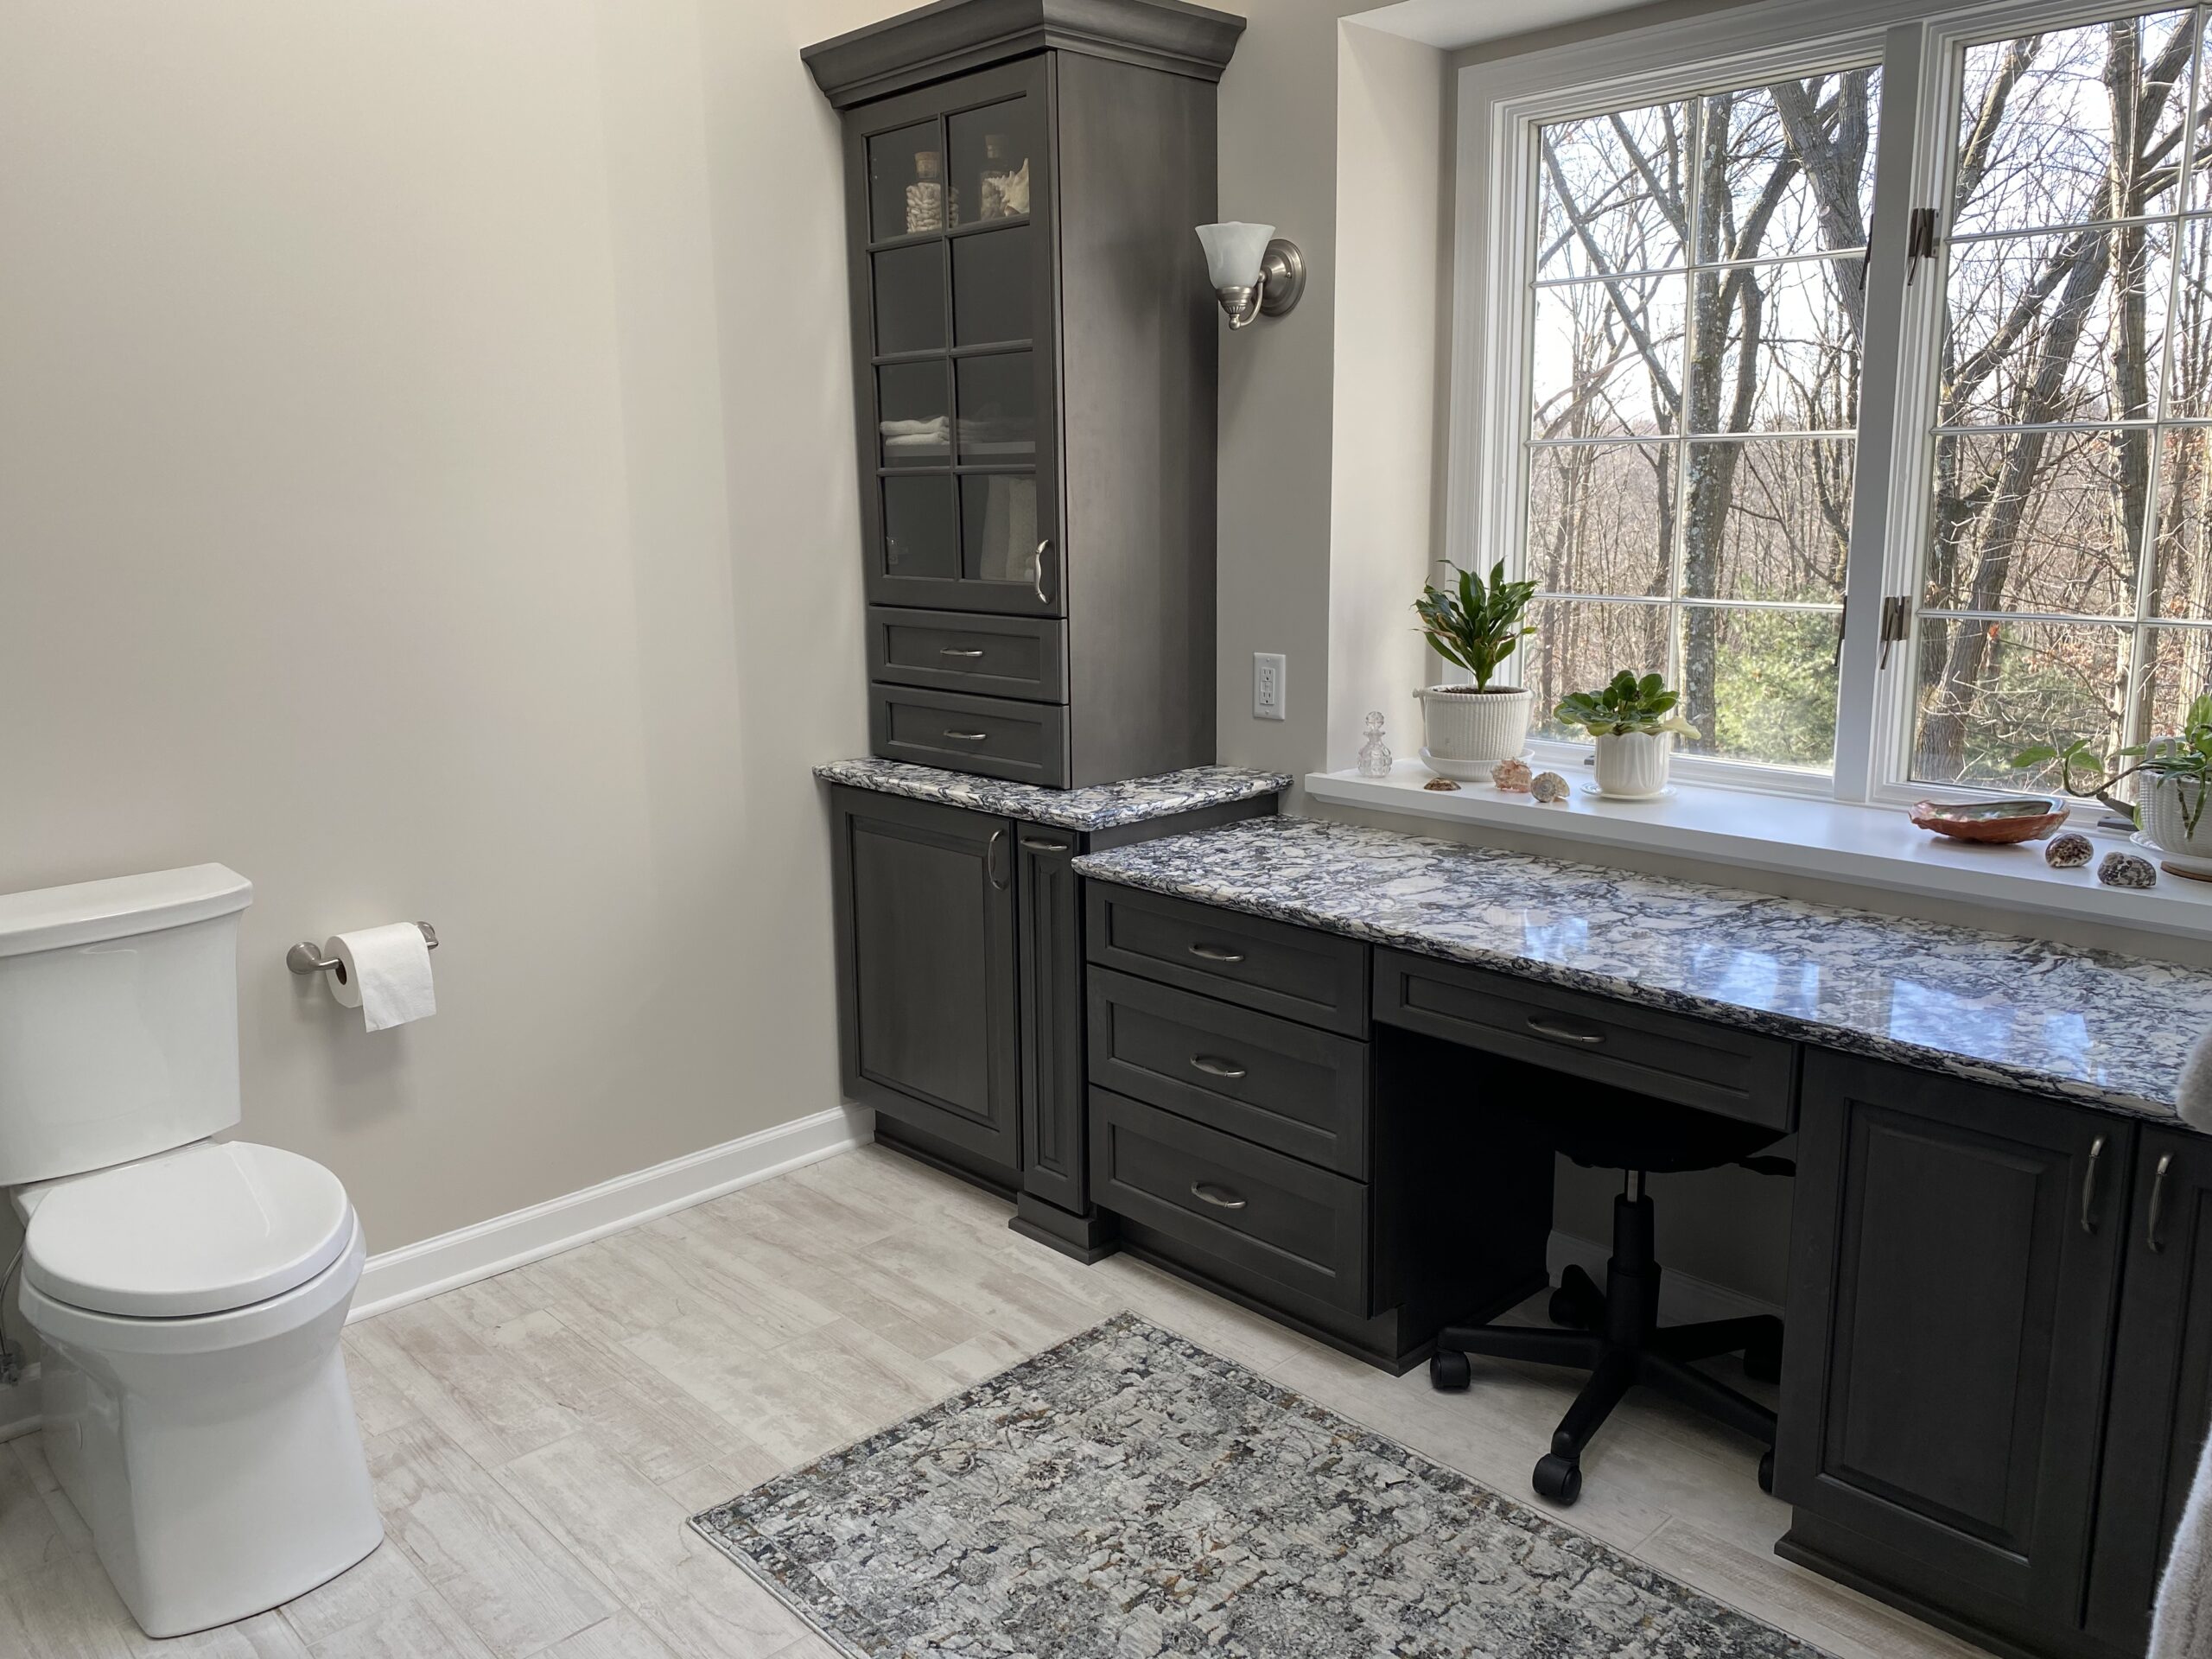 Classic marble counter bathroom, black and white countertop, dark cabinet shelves, big window, toilet